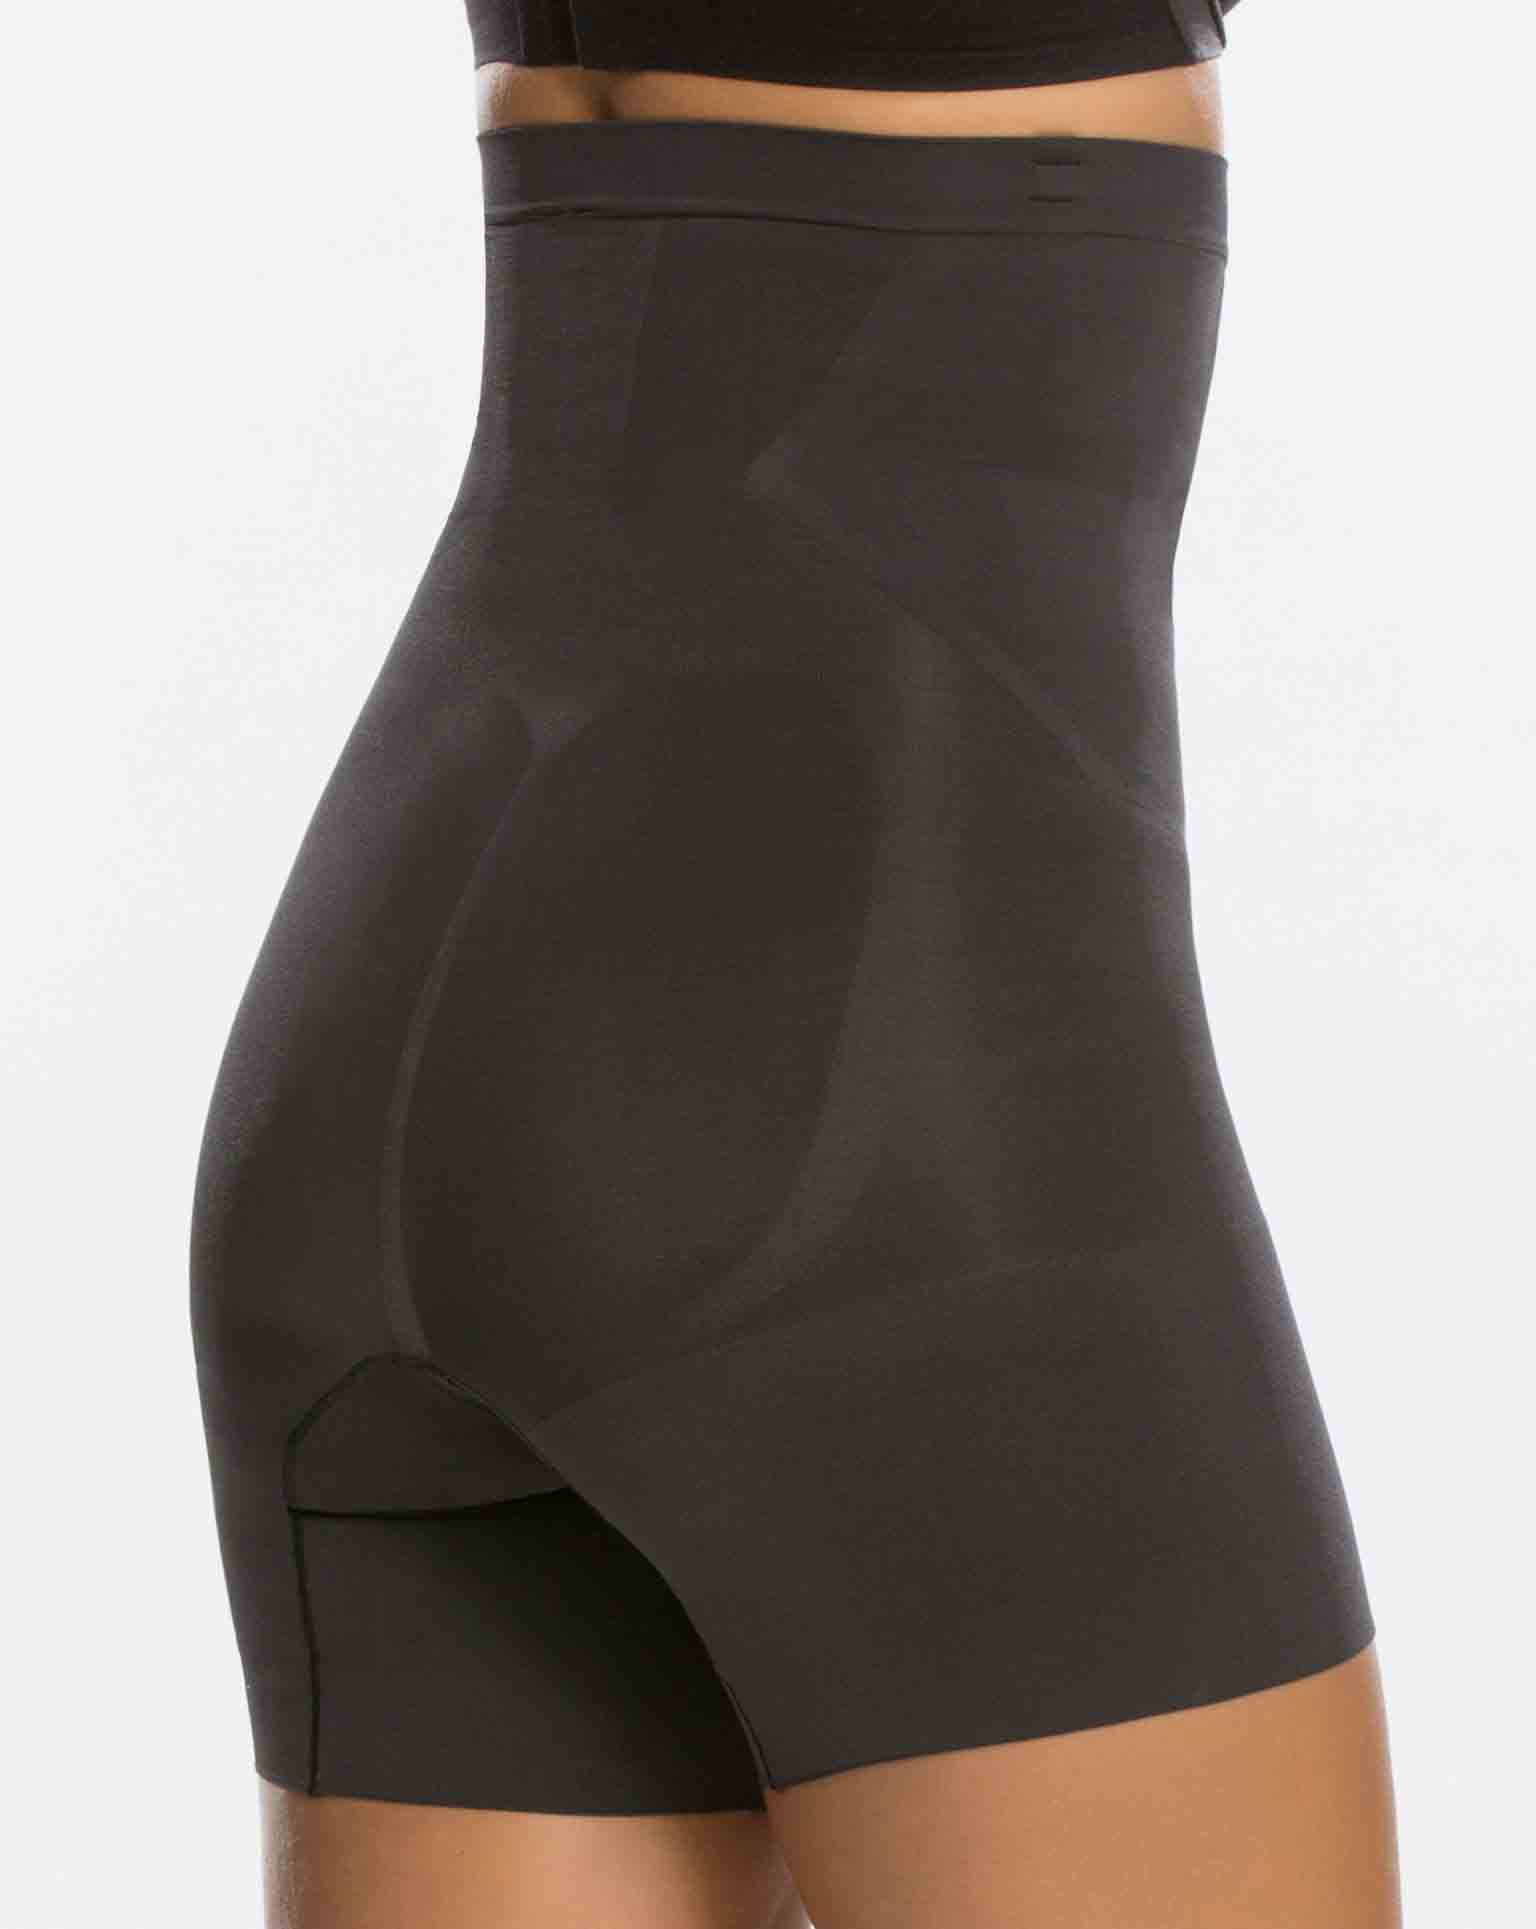 Spanx OnCore High-Waisted Mid-Thigh Shaper